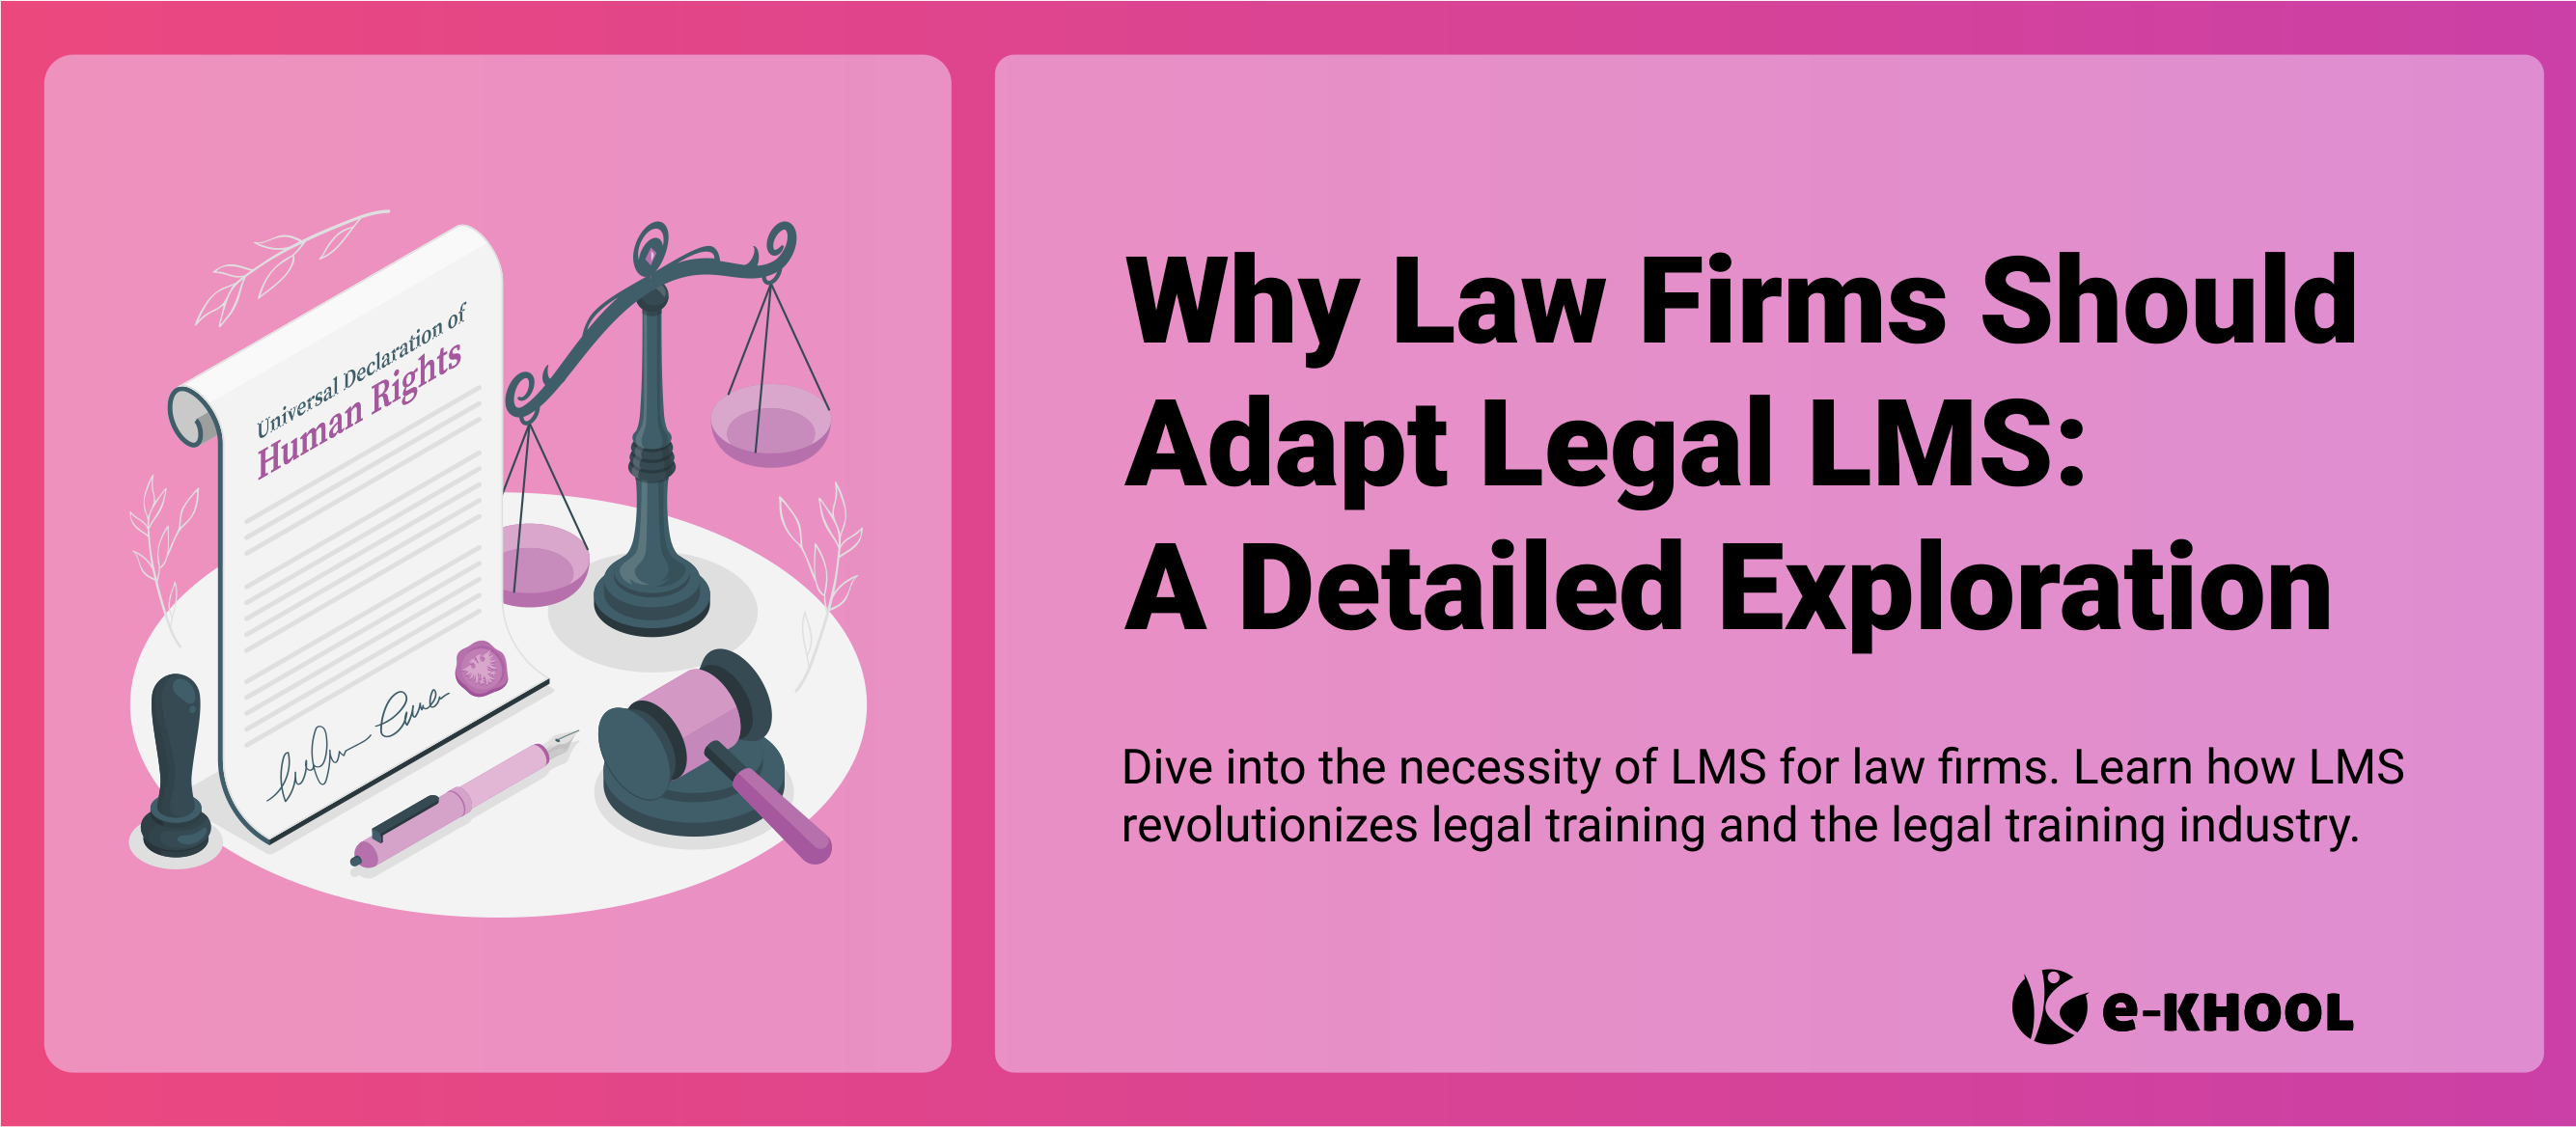 Why Law Firms Should Adapt Legal LMS : A Detailed Exploration  